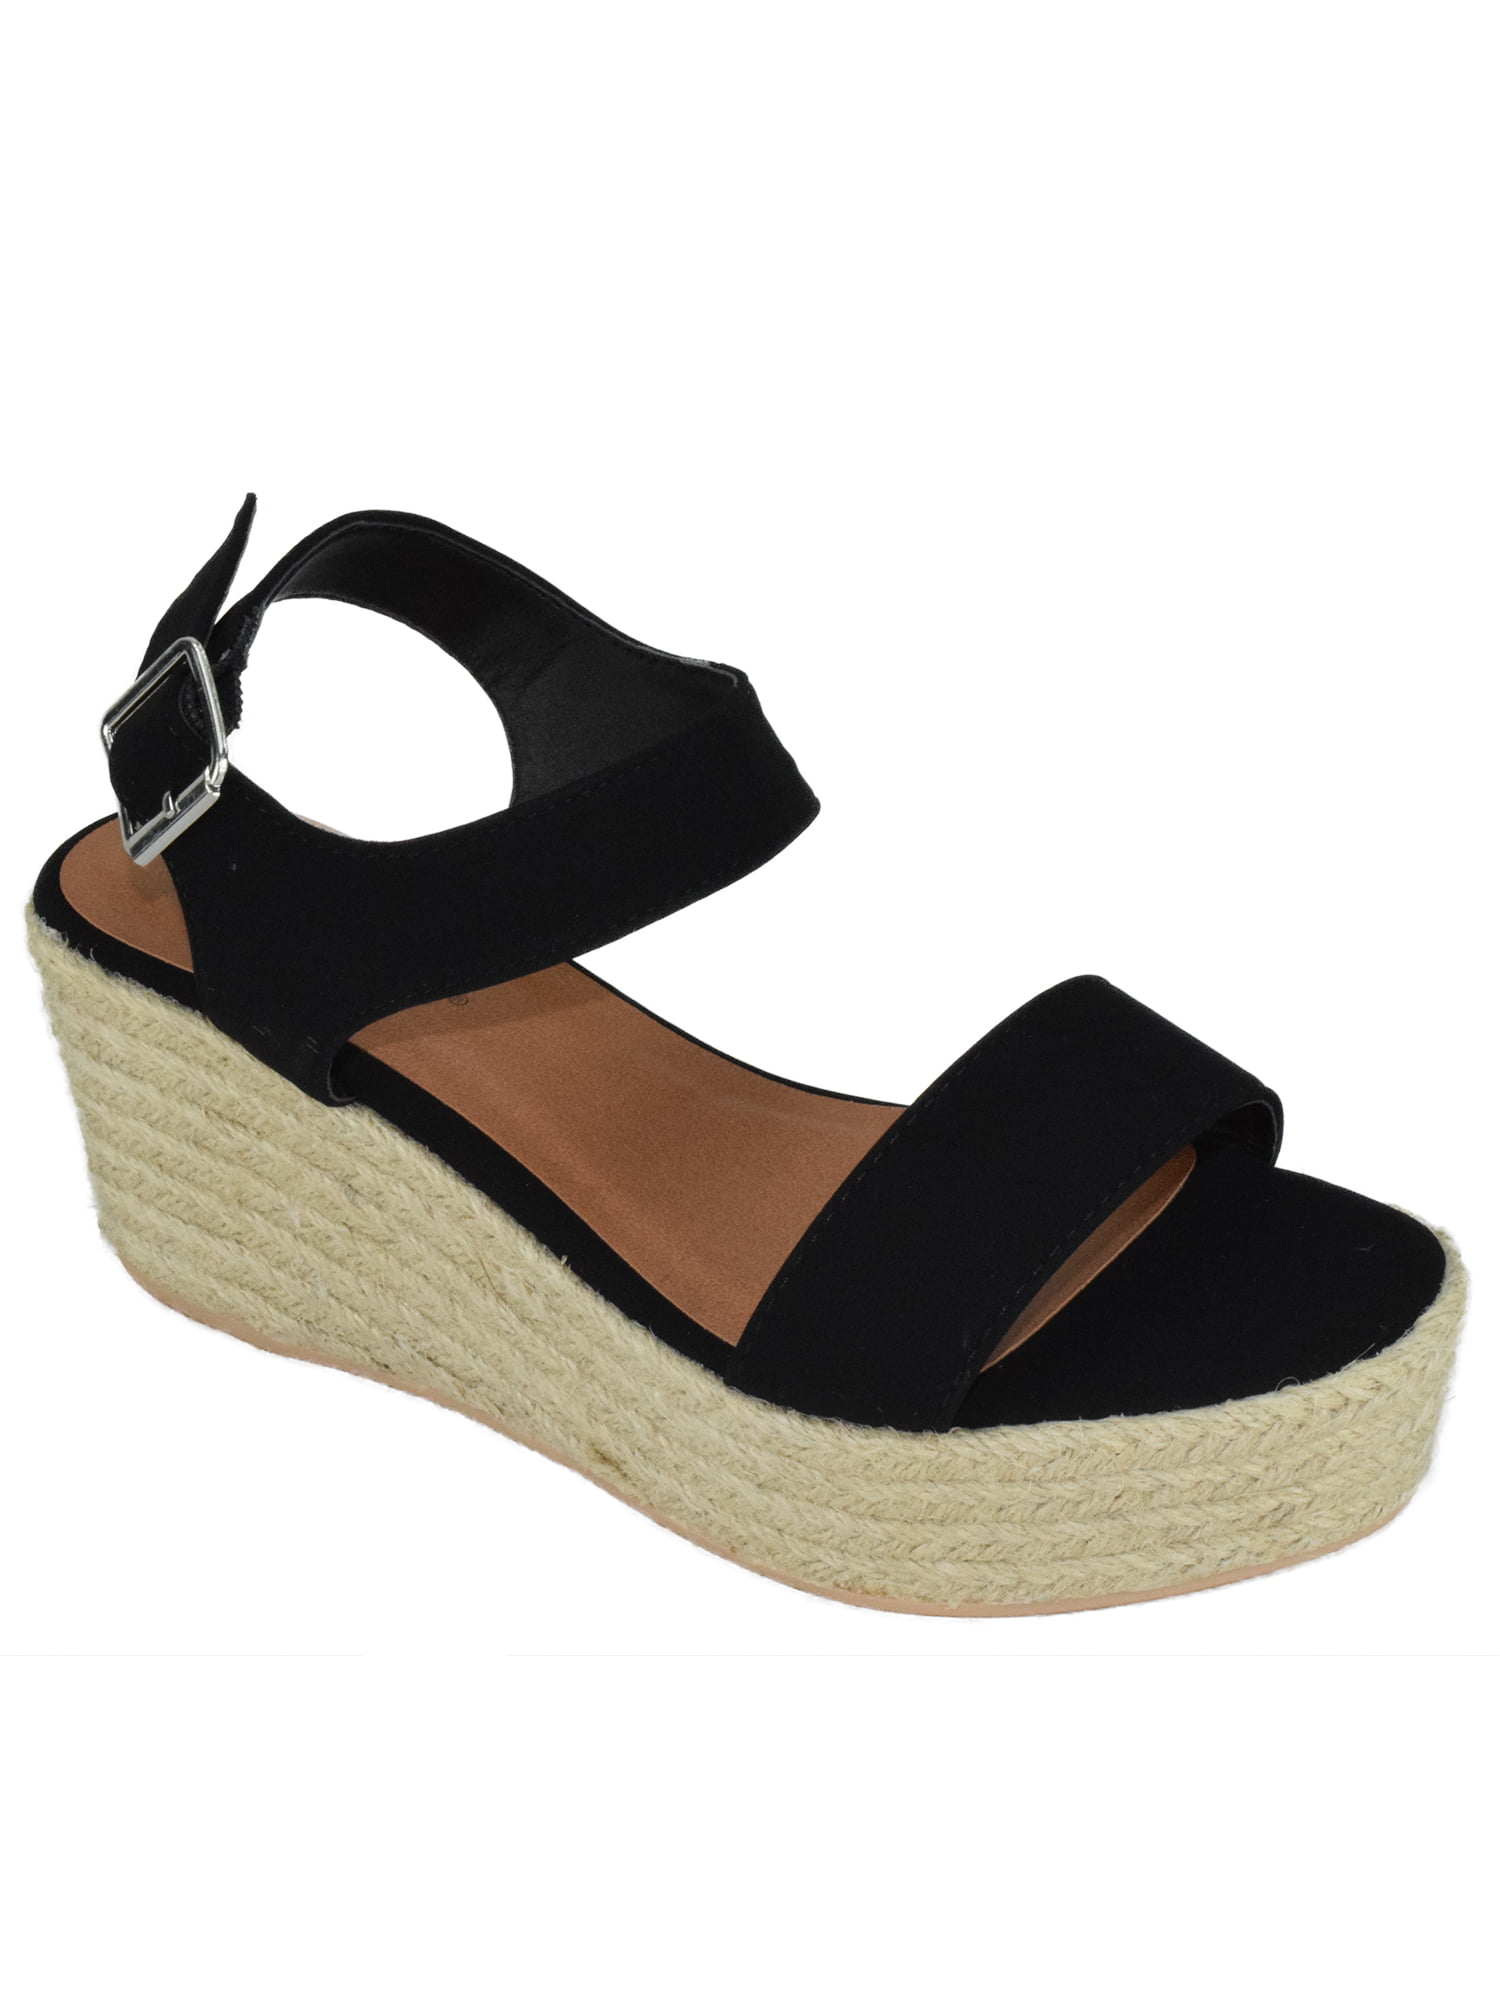 City Classified womens Wedges